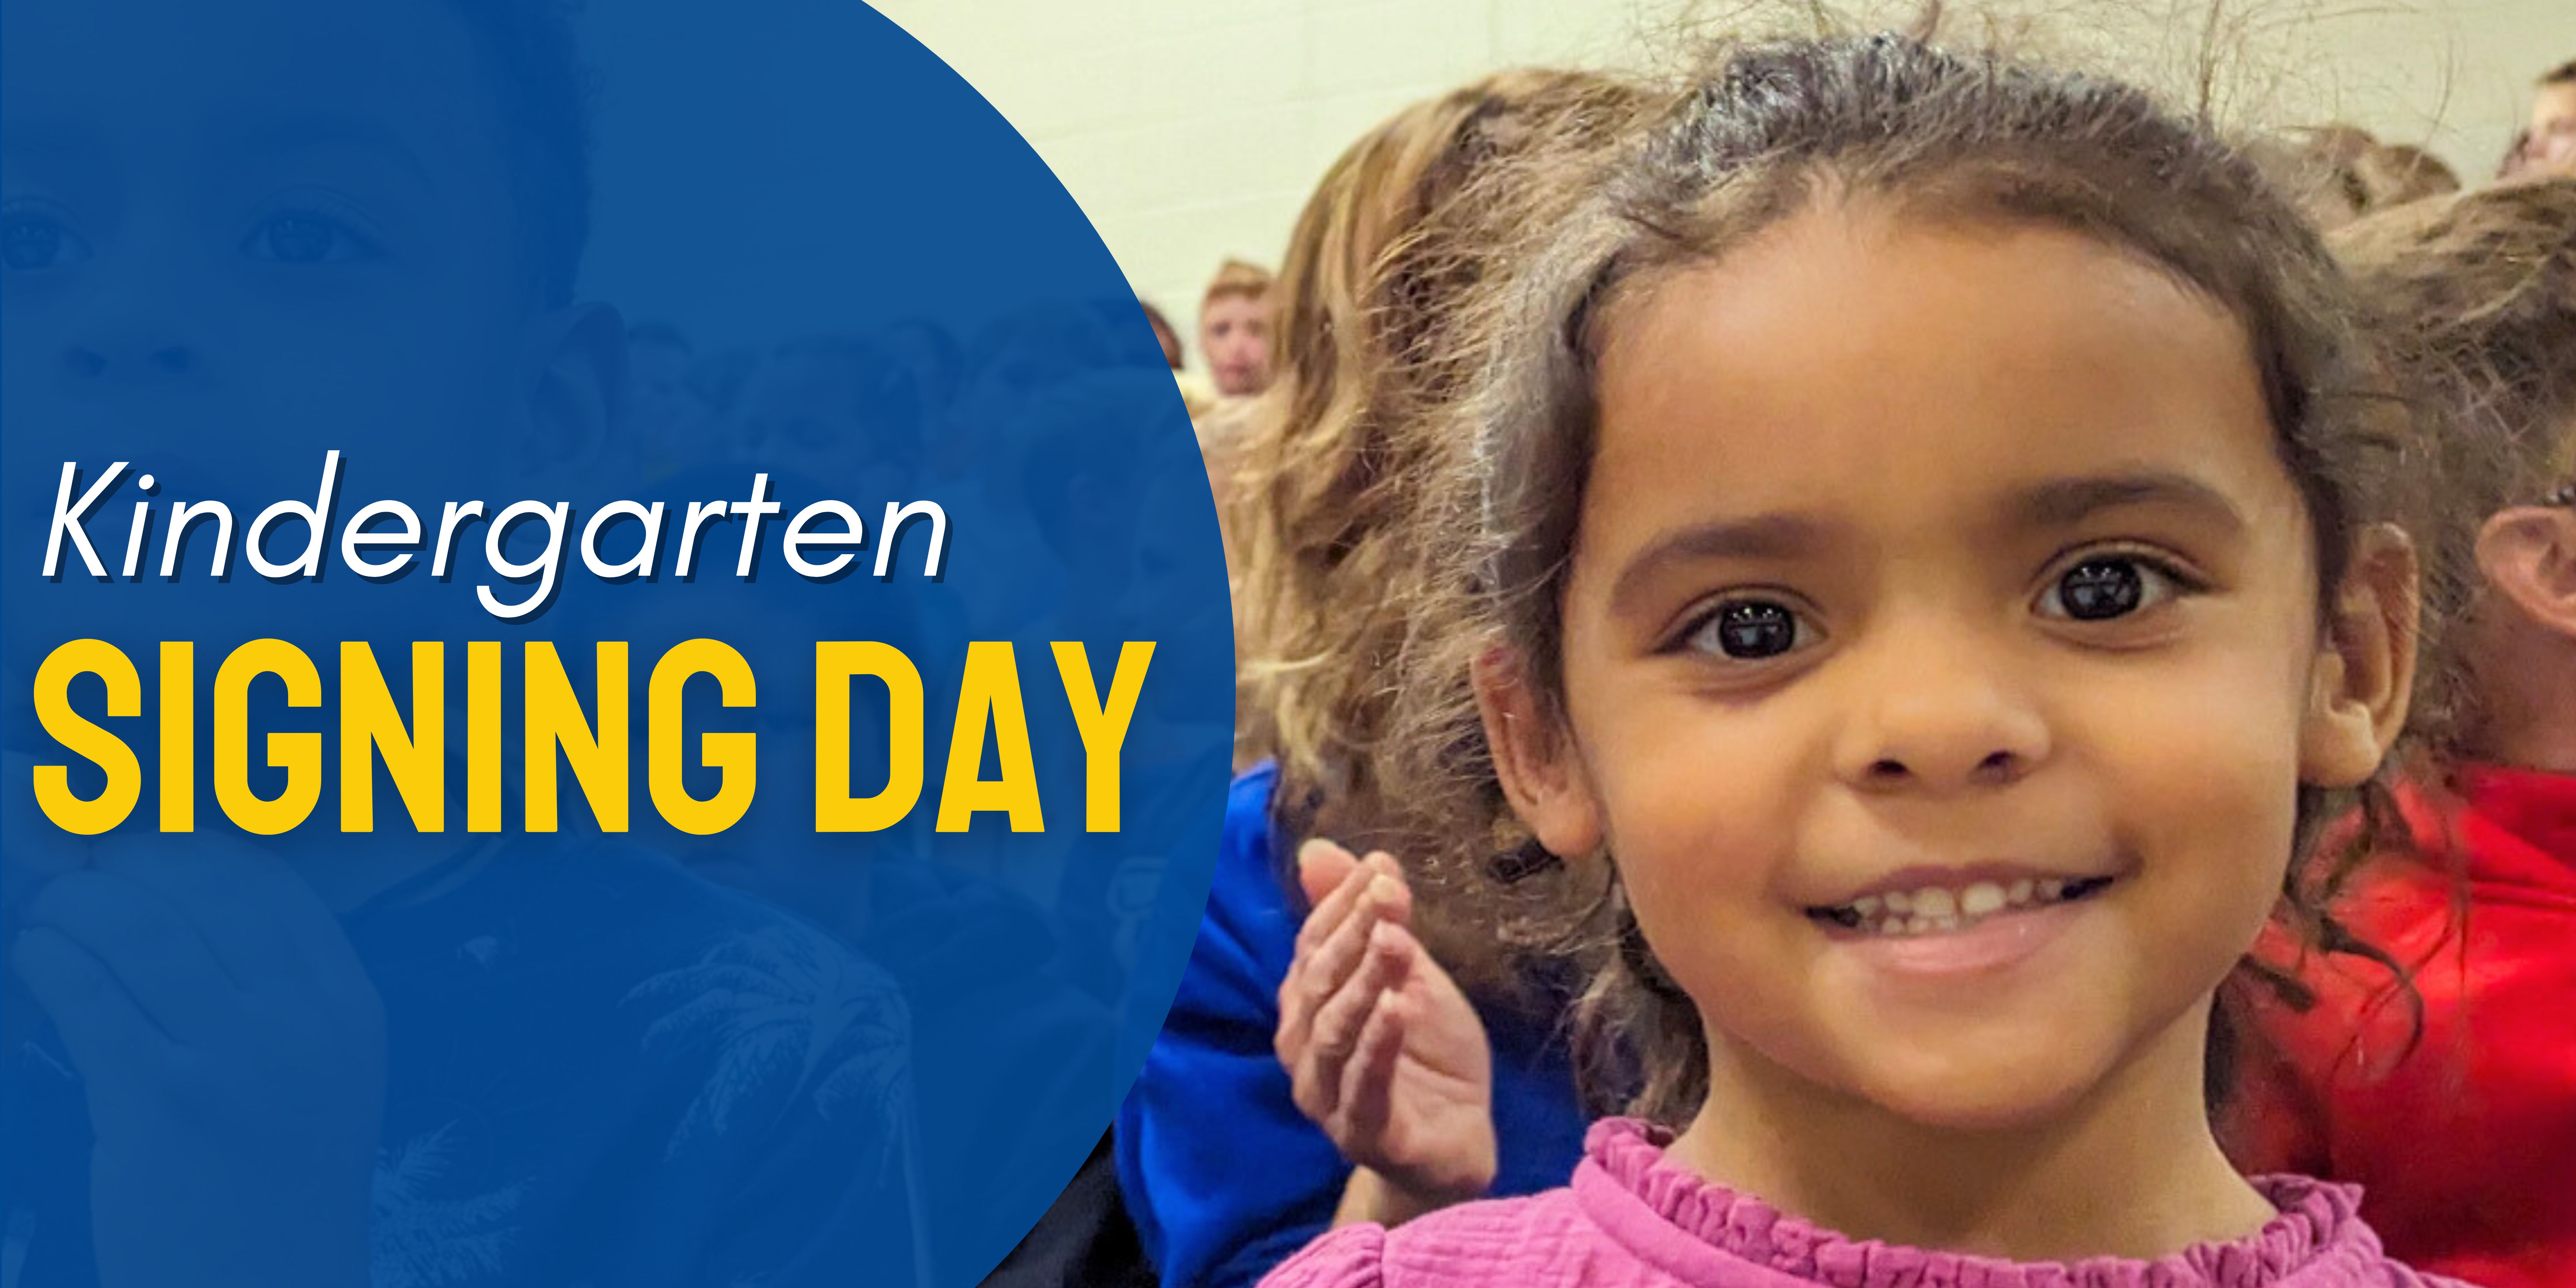 Kindergarten Signing Day graphic with picture of smiling student